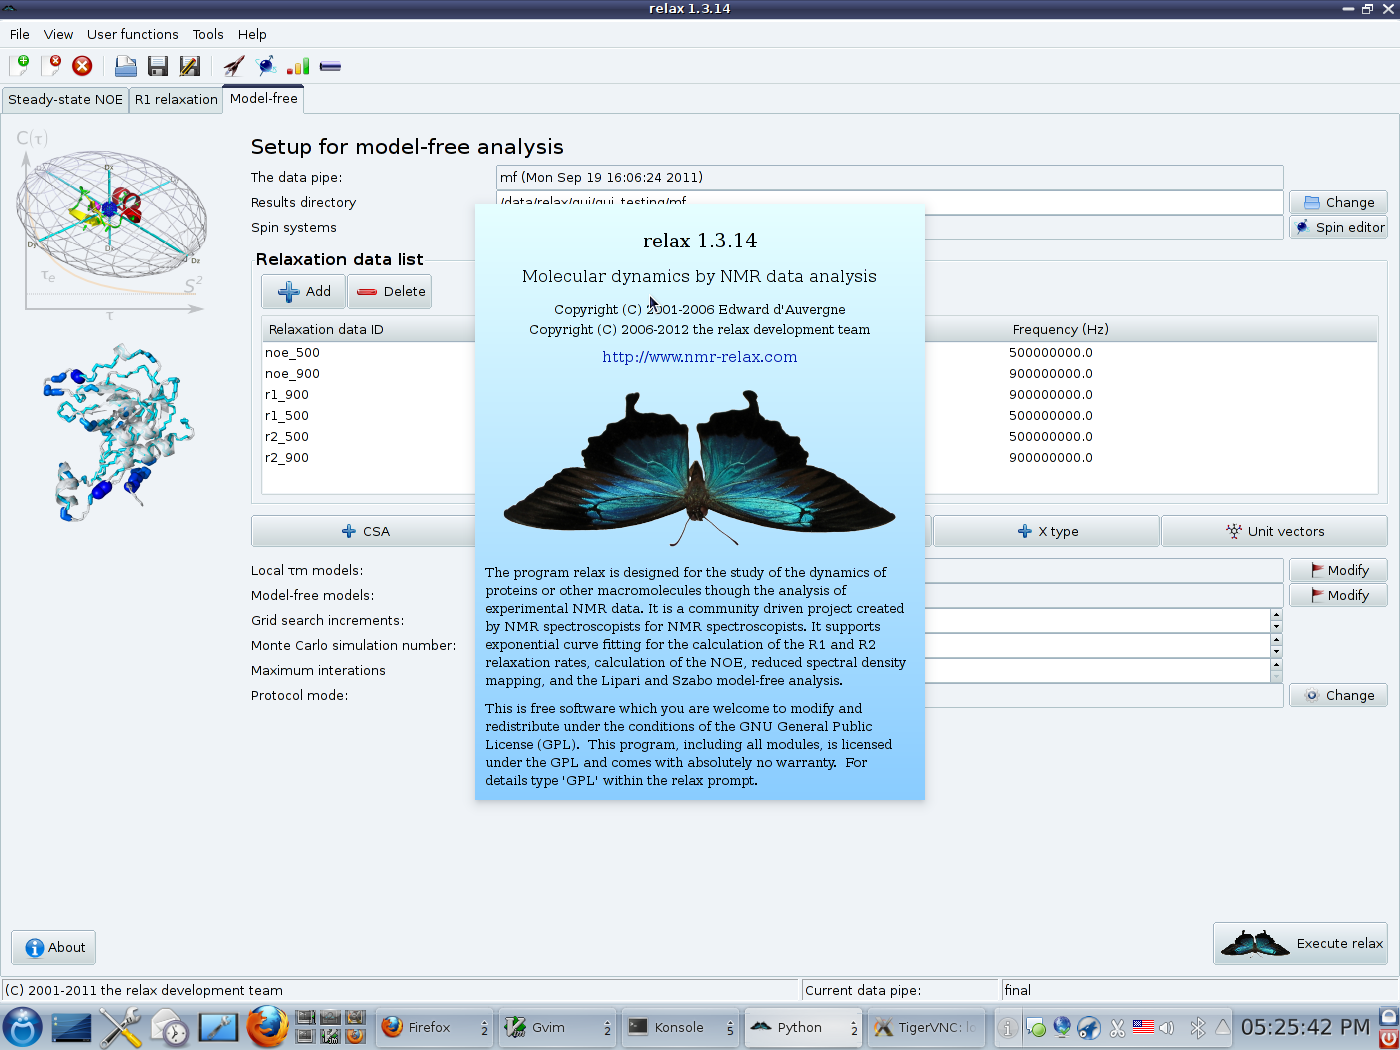 Screenshot of the graphical user inteface (GUI) about relax screen of the program relax (software for NMR dynamics analyses, specifically: Model-free, NMR relaxation (R1, R2, NOE), reduced spectral density mapping, N-state models, frame order theory).